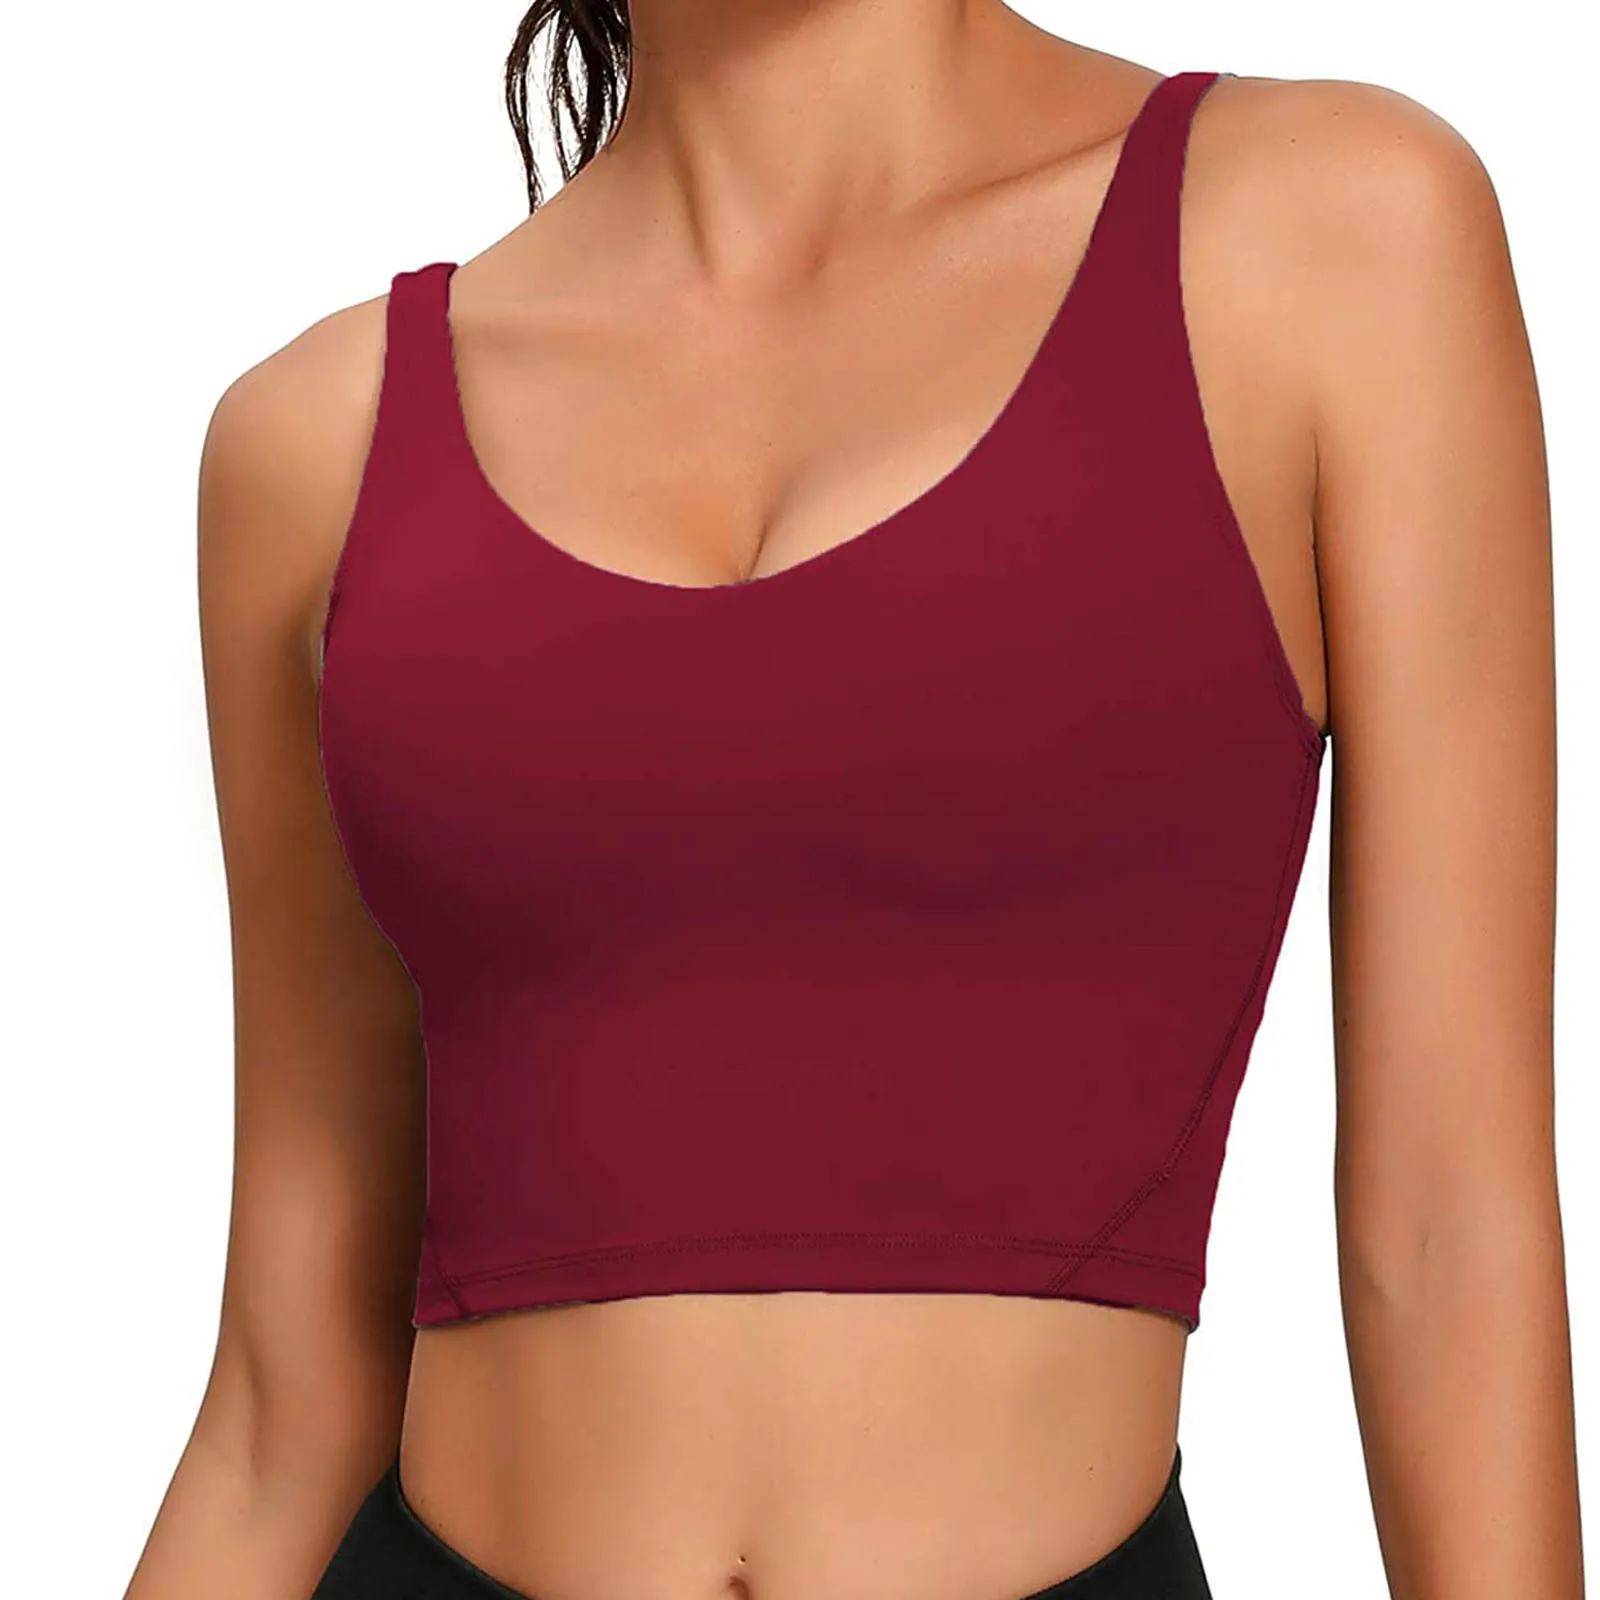 New Padded Bra Tank Top Women Spaghetti Solid Cami Top Vest Female Camisole  With Built In Bra Fitness Clothing - Beyondshoping